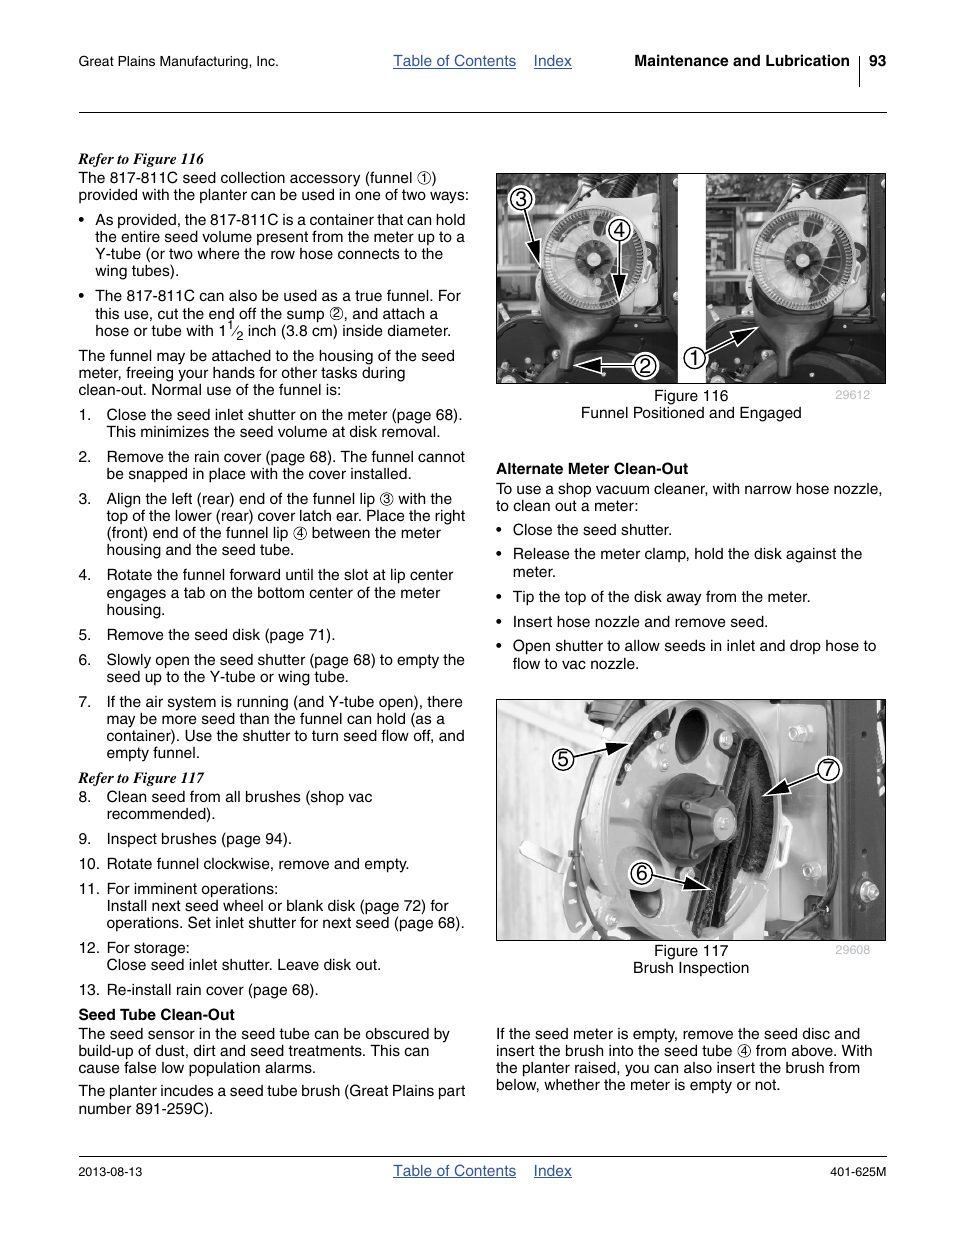 Alternate meter clean-out, Seed tube clean-out, Alternate meter clean-out seed tube clean-out | Great Plains YP1625A Operator Manual User Manual | Page 97 / 172